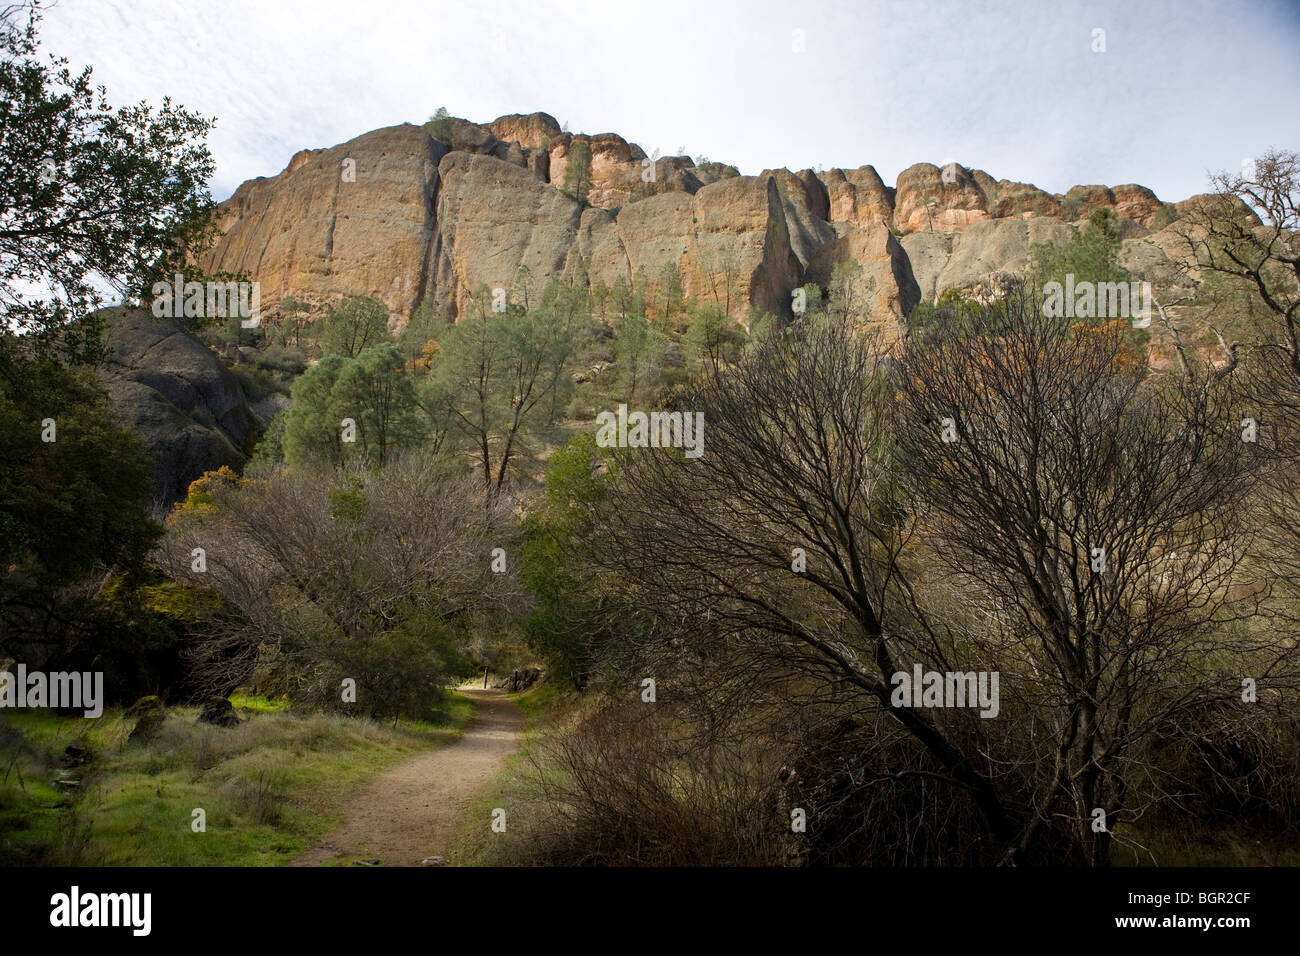 Old Pinnacles Trail leading up to the Balconies Cliffs, Pinnacles National Monument, California, United States of America Stock Photo